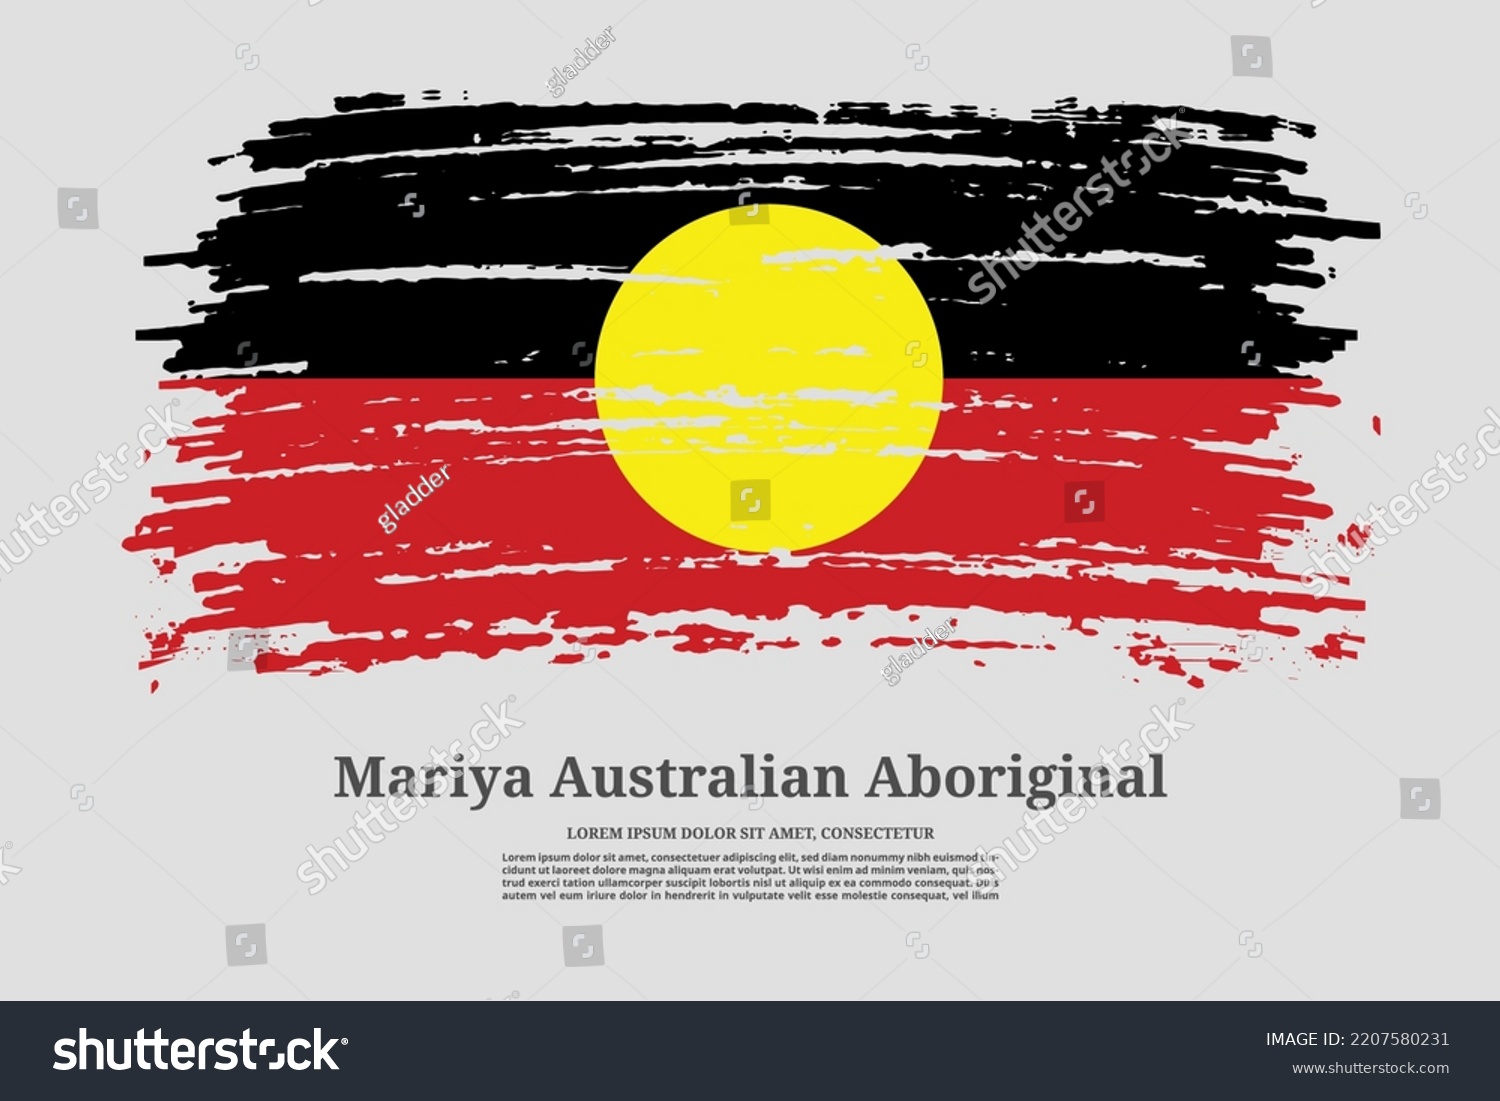 SVG of Australian Aboriginal - Mariya flag with brush stroke effect and information text poster, vector background svg